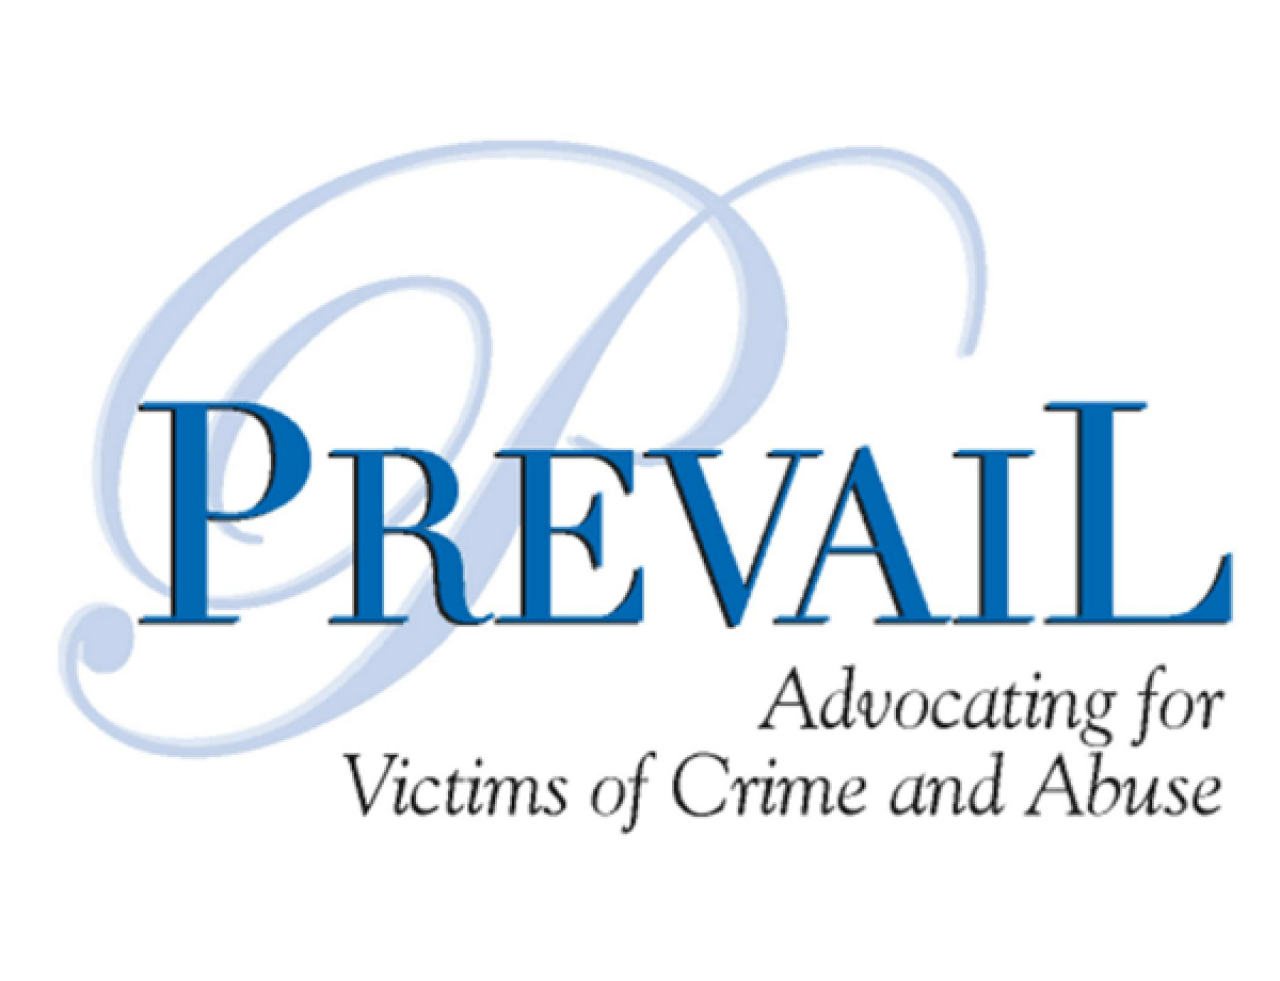 Prevail: Advocating for Victims of Crime and Abuse.